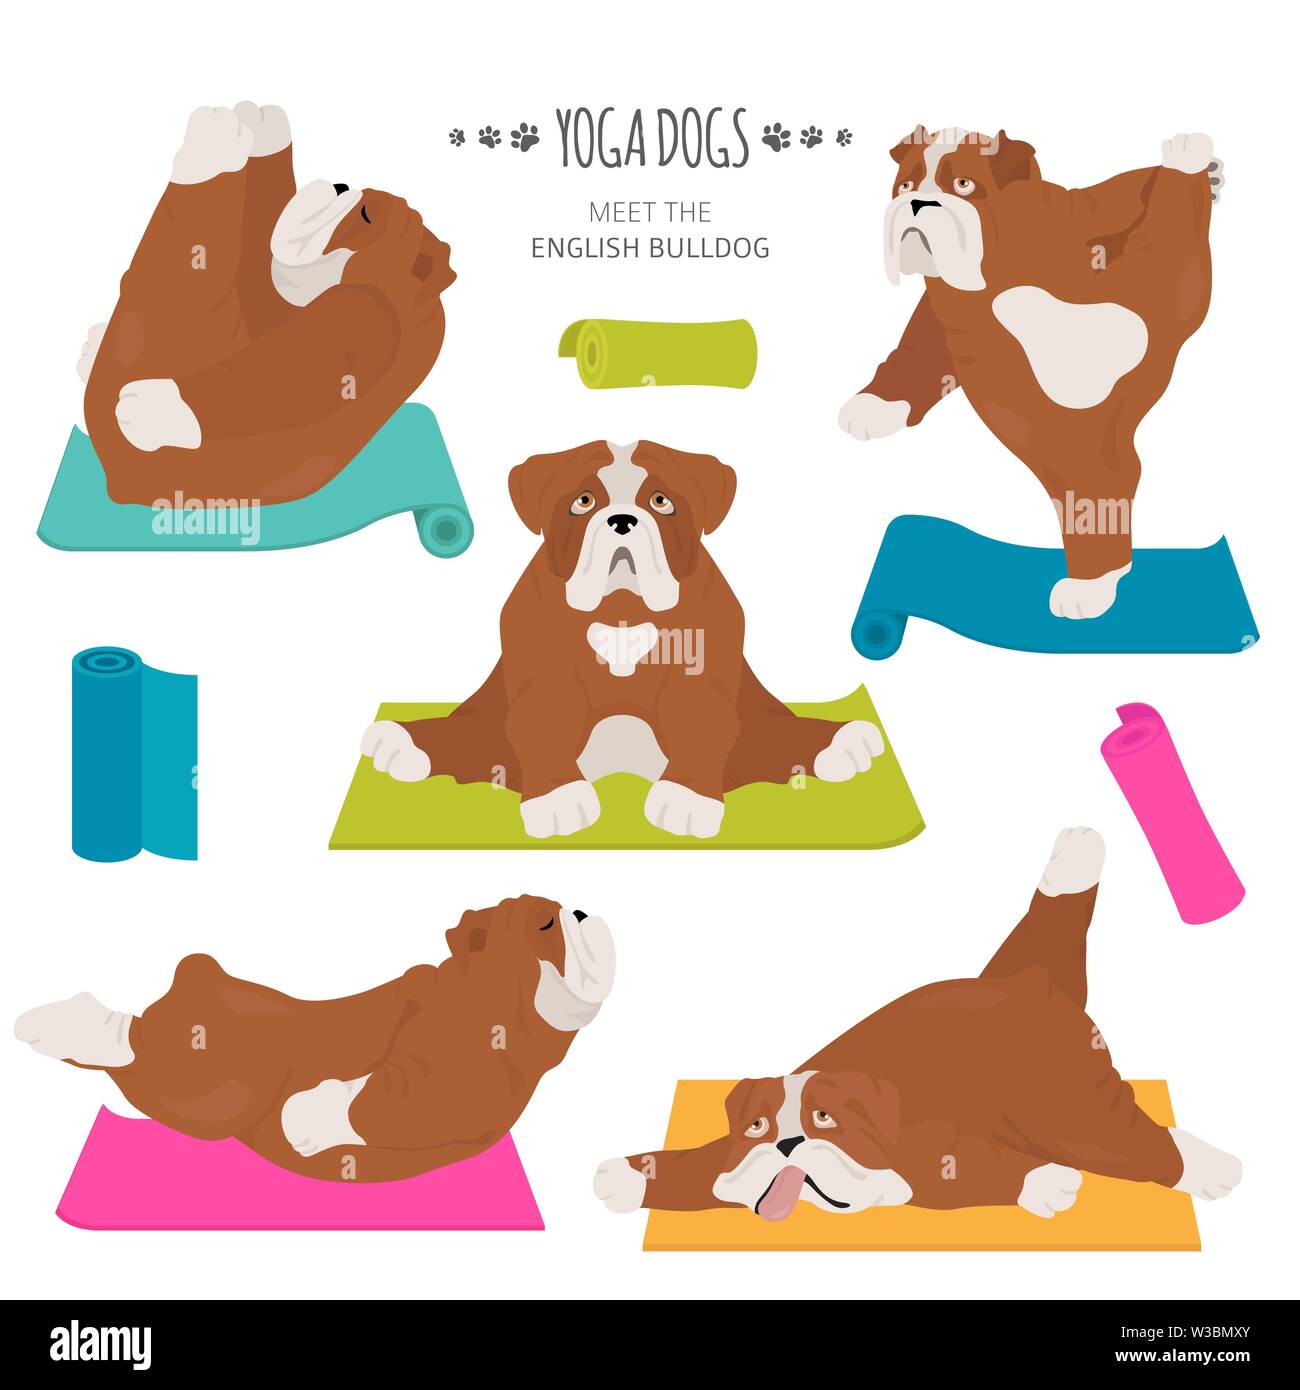 Yoga dogs poses and exercises. English bulldog clipart. Vector illustration Stock Vector